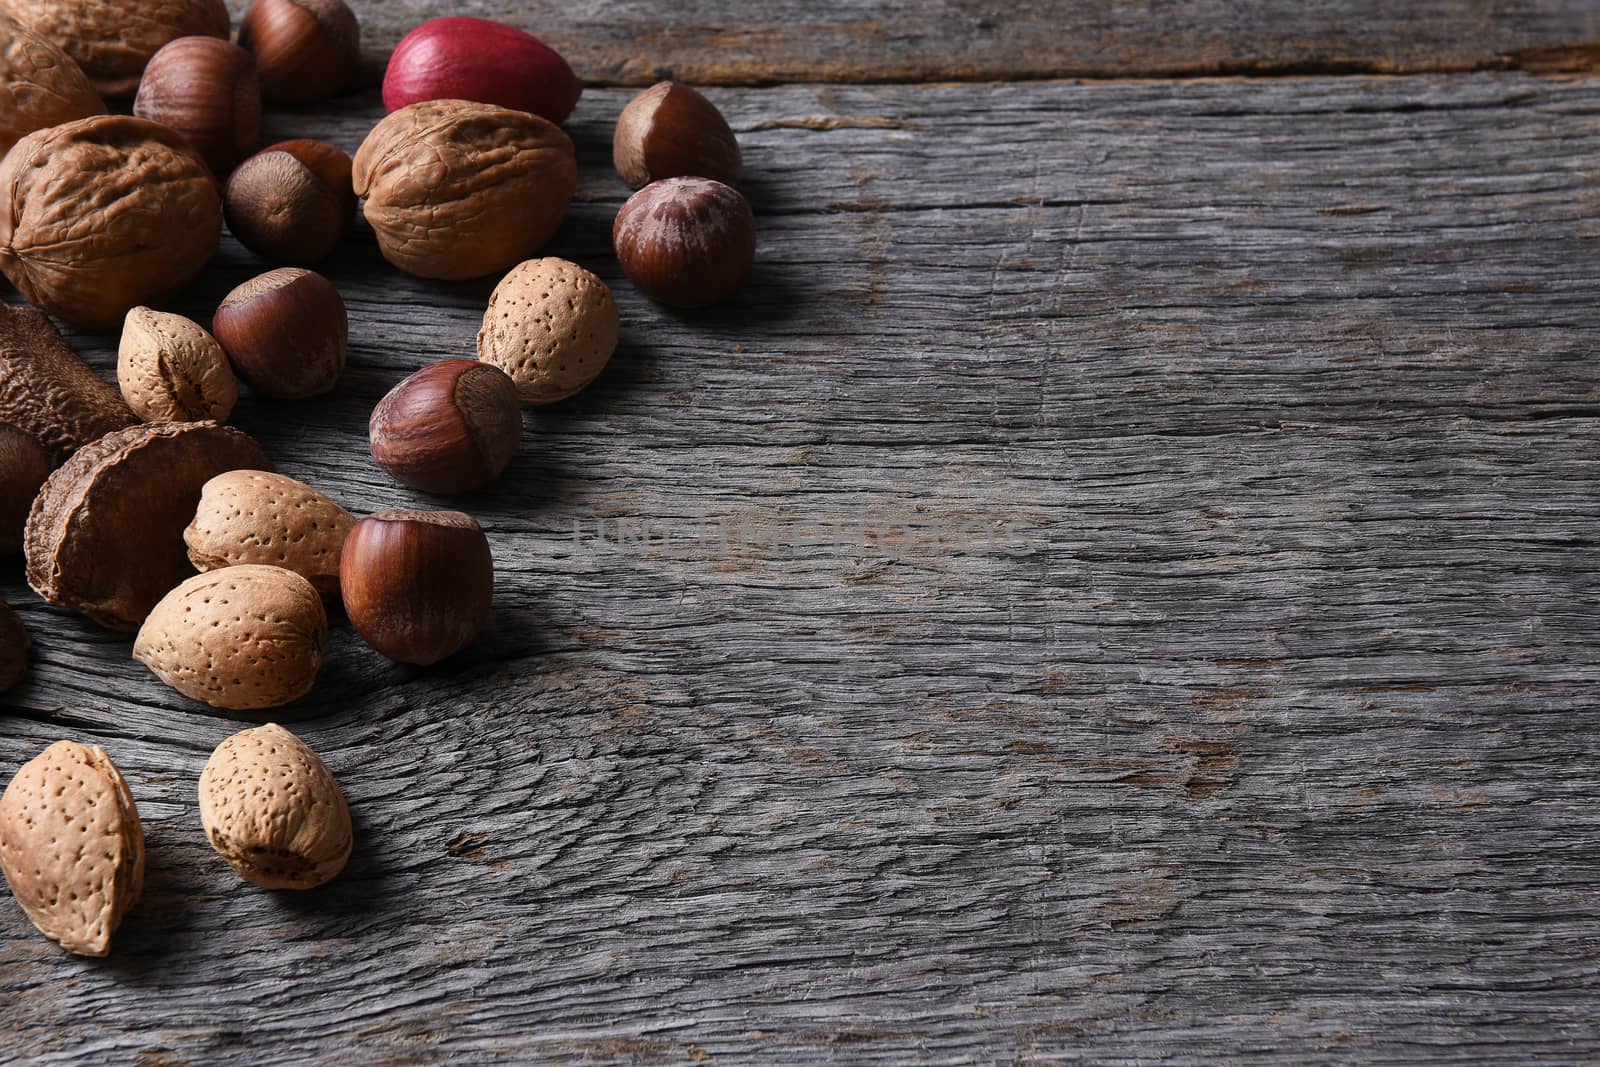 Mixed nuts on a rustic wood table with copy space, Walnuts, Pecans, Hazelnuts, Brazil Nuts and Almonds make up the array.